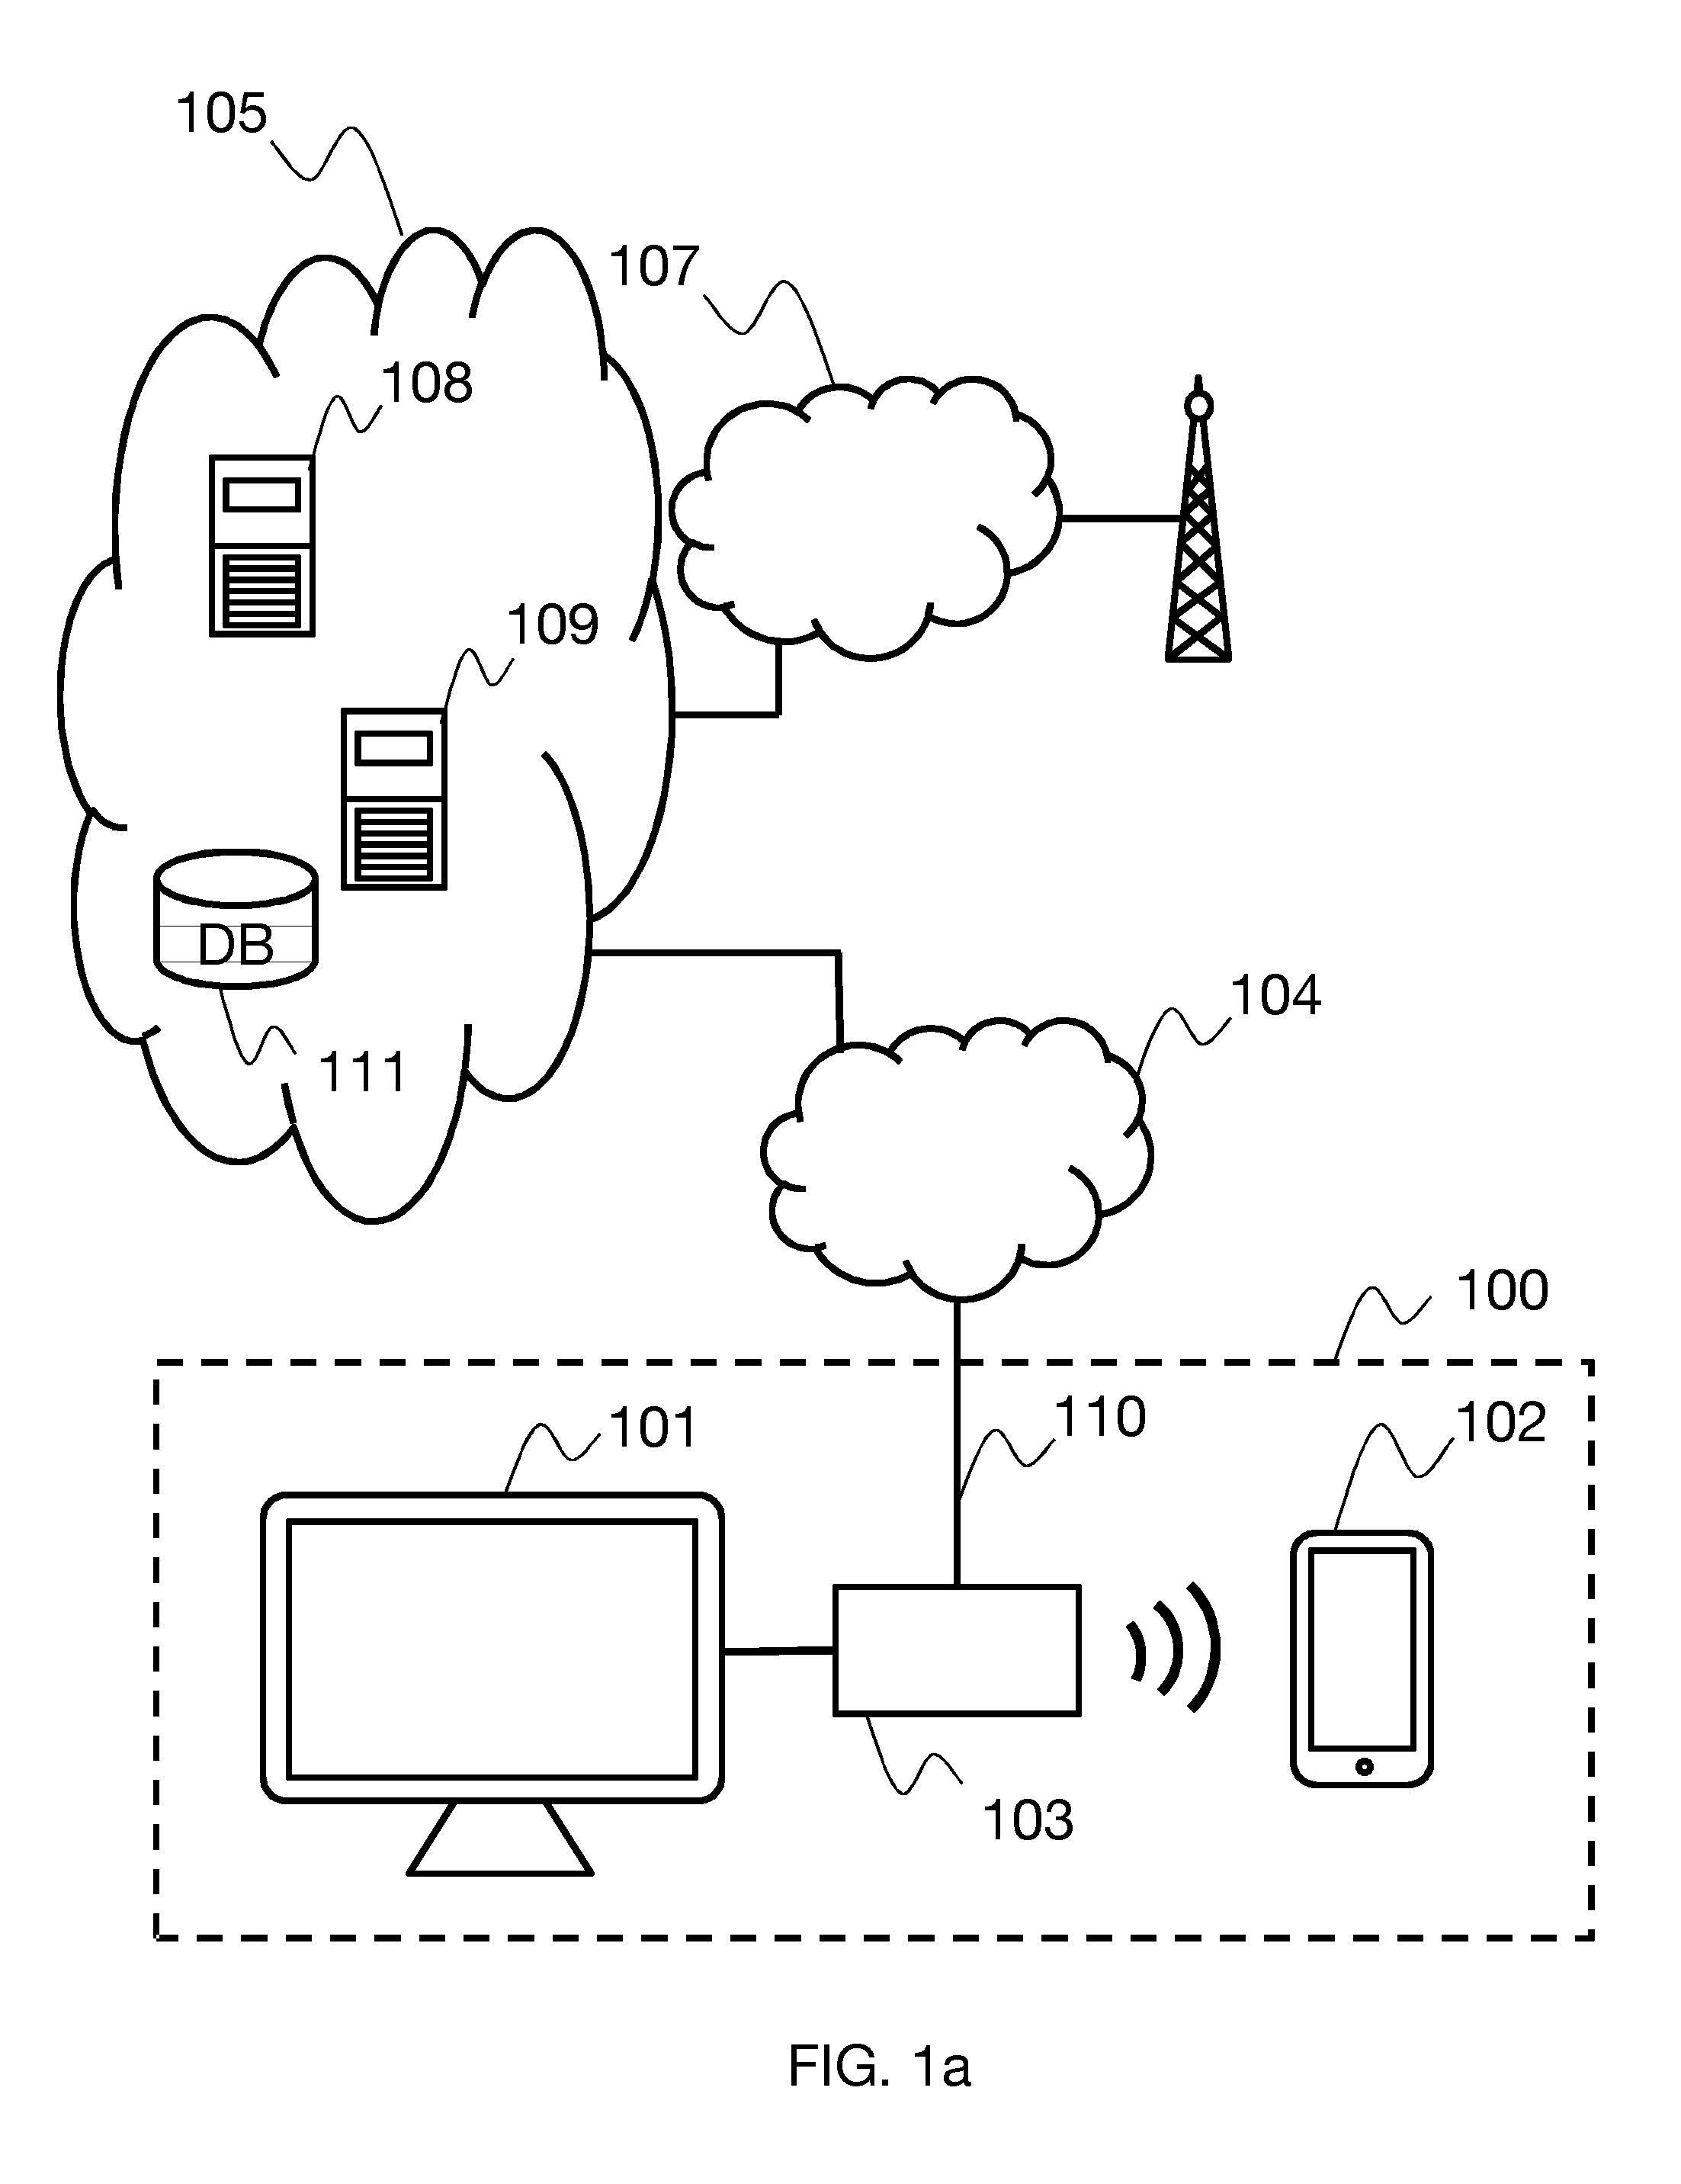 Method of Authentication by Token